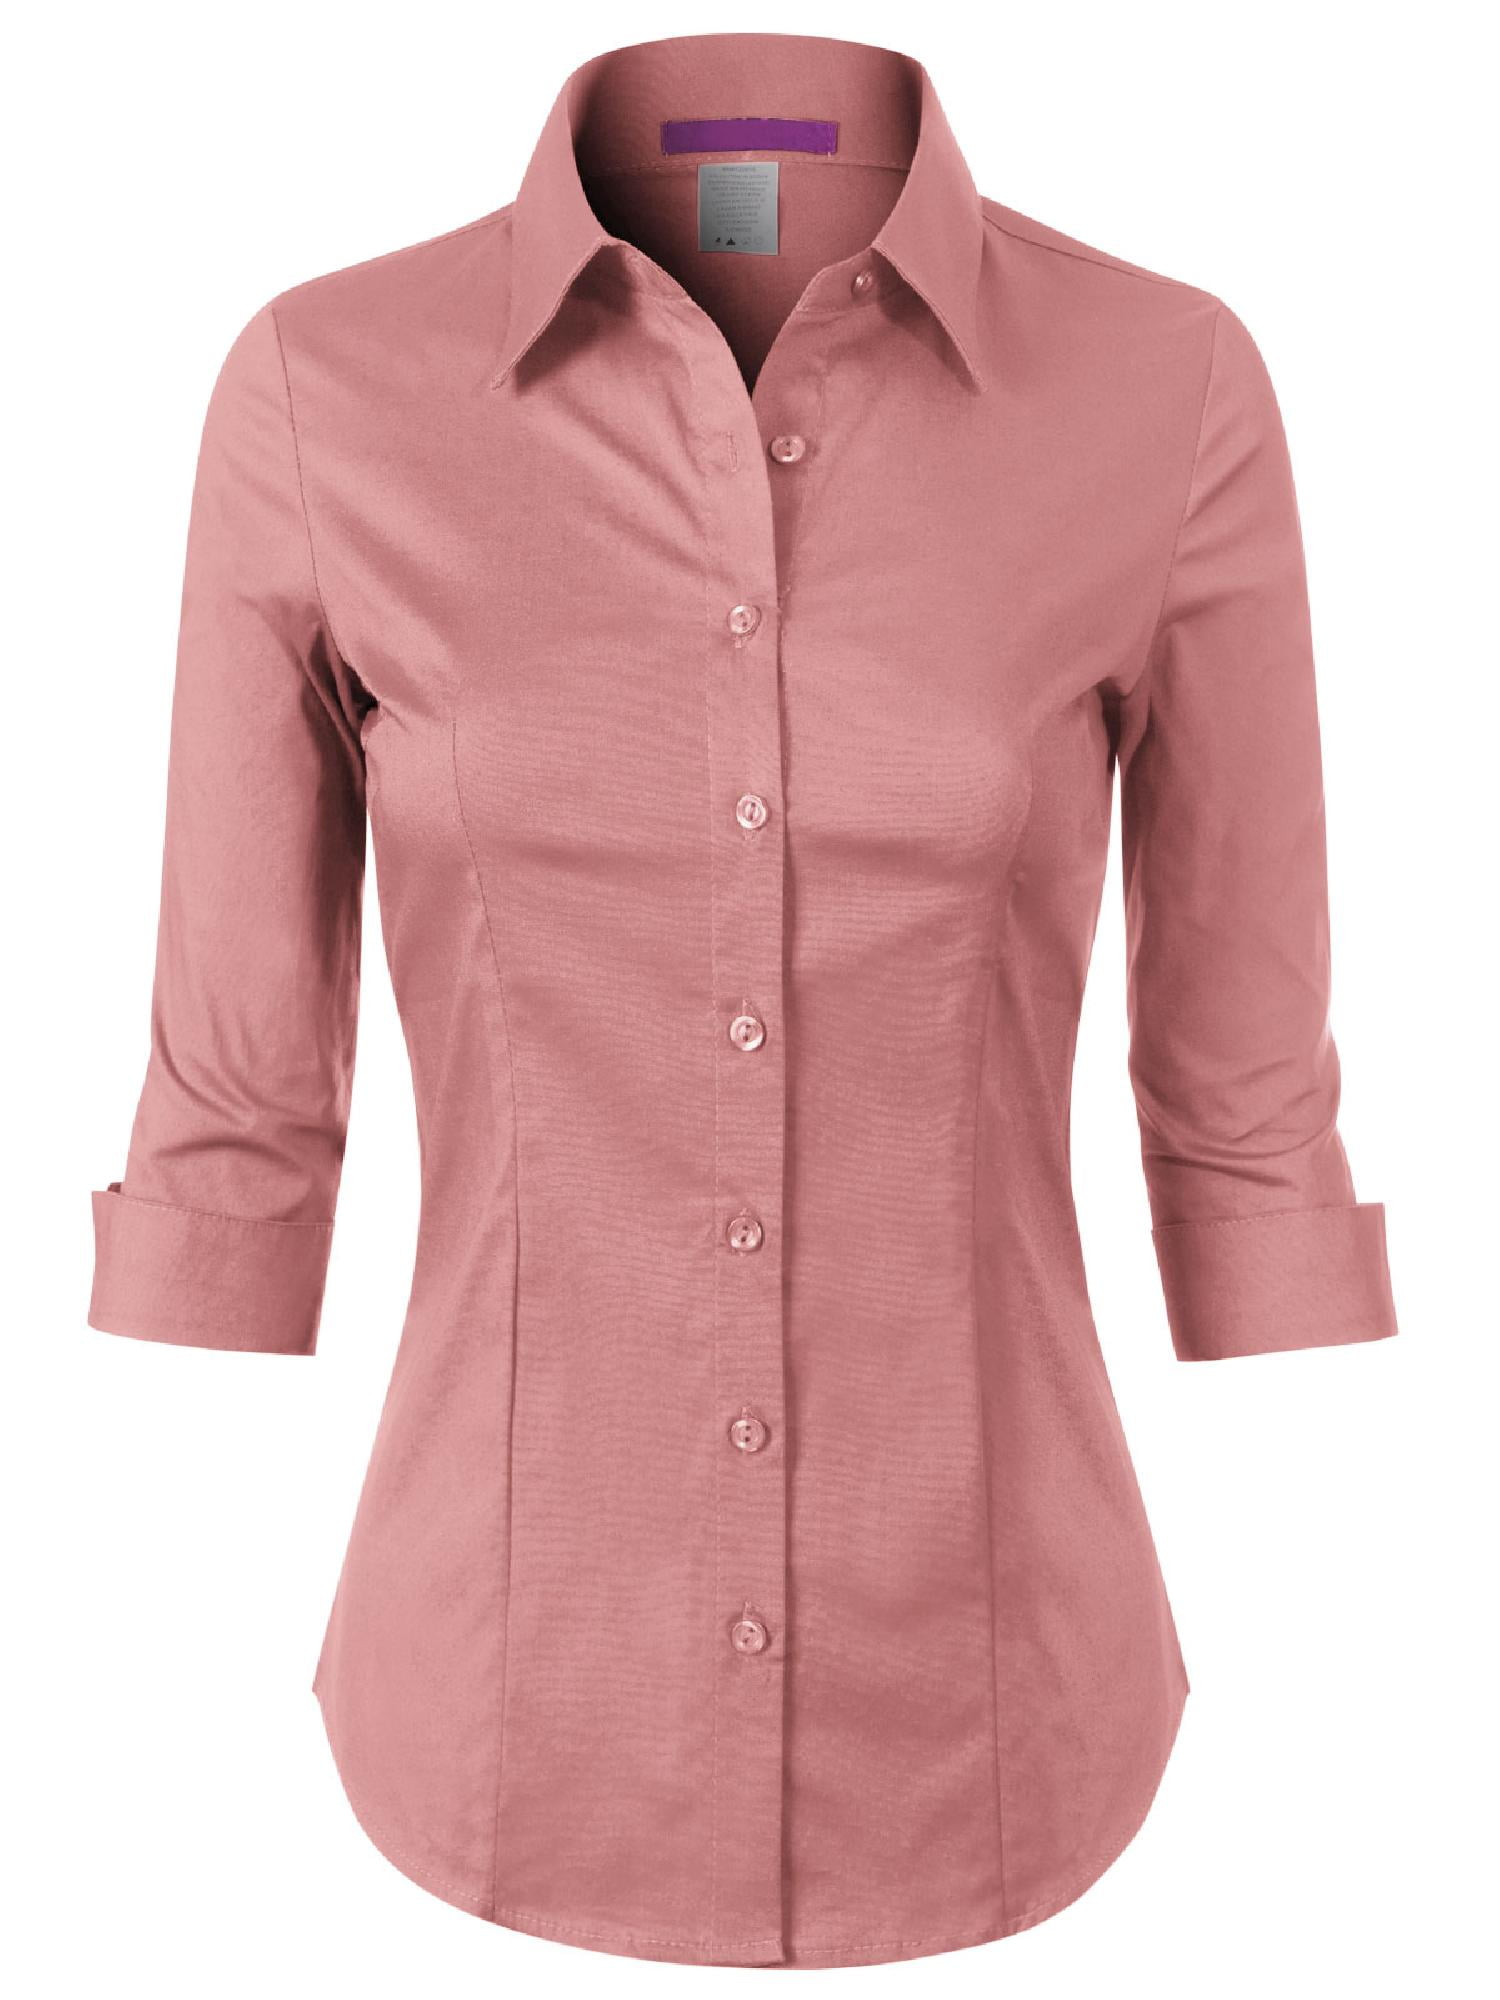 Up to 6X Women 3/4Sleeve Office Casual Button Down Blouse Shirt Junior PlusSize 